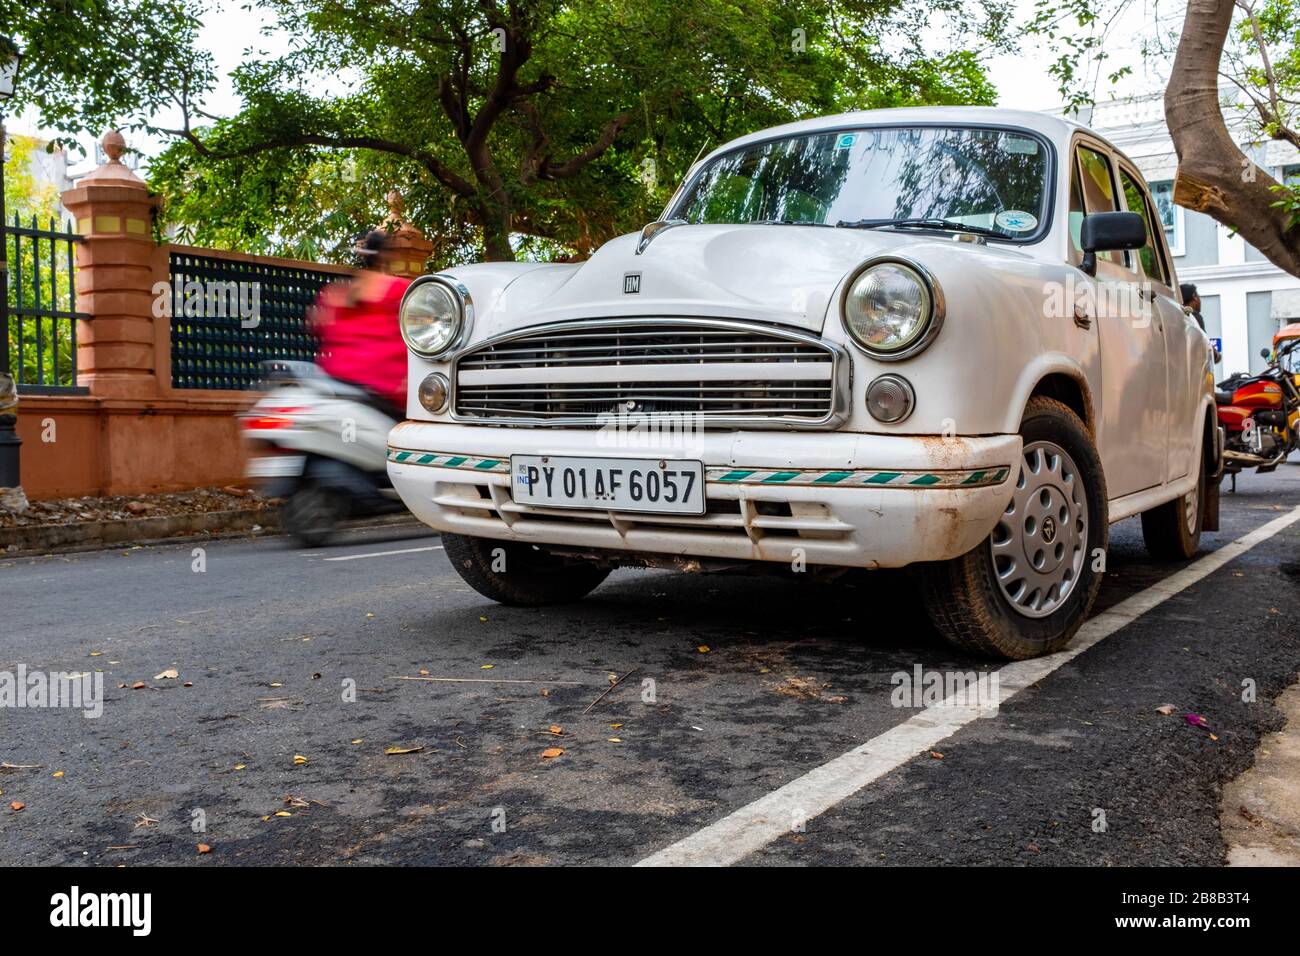 Pondicherry, India - March 17, 2018: Vintage white Indian car (Hindustan Ambassador) and a scooter passing by with motion blur Stock Photo